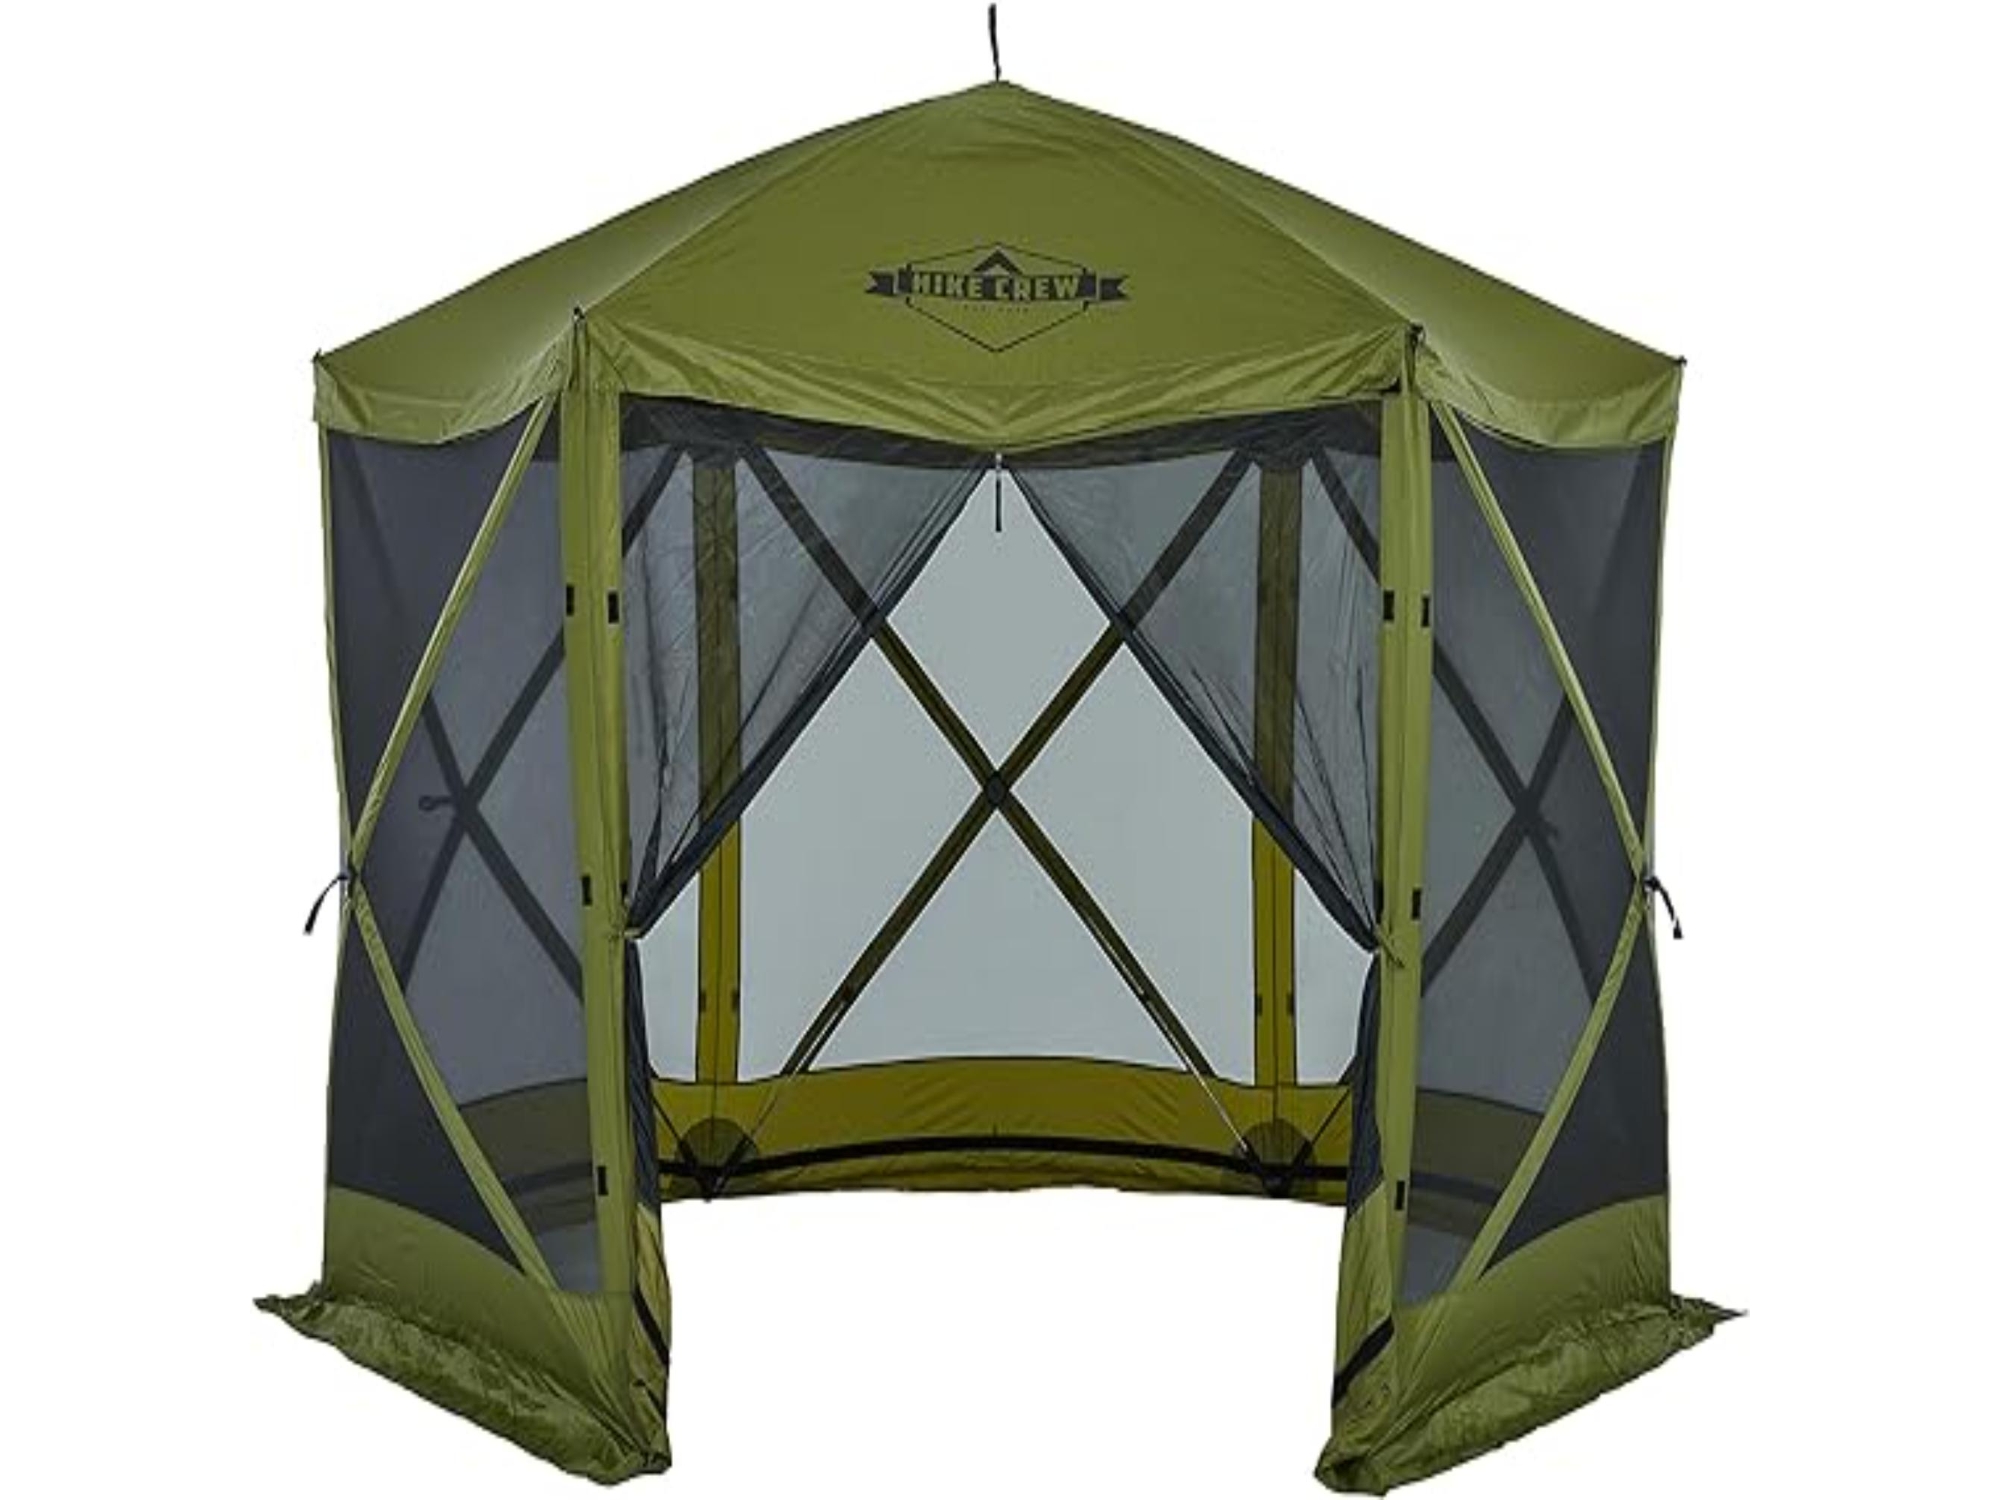 Hike Crew 12 x 12 Pop Up Gazebo, 6-Sided Outdoor Tent Canopy, Green